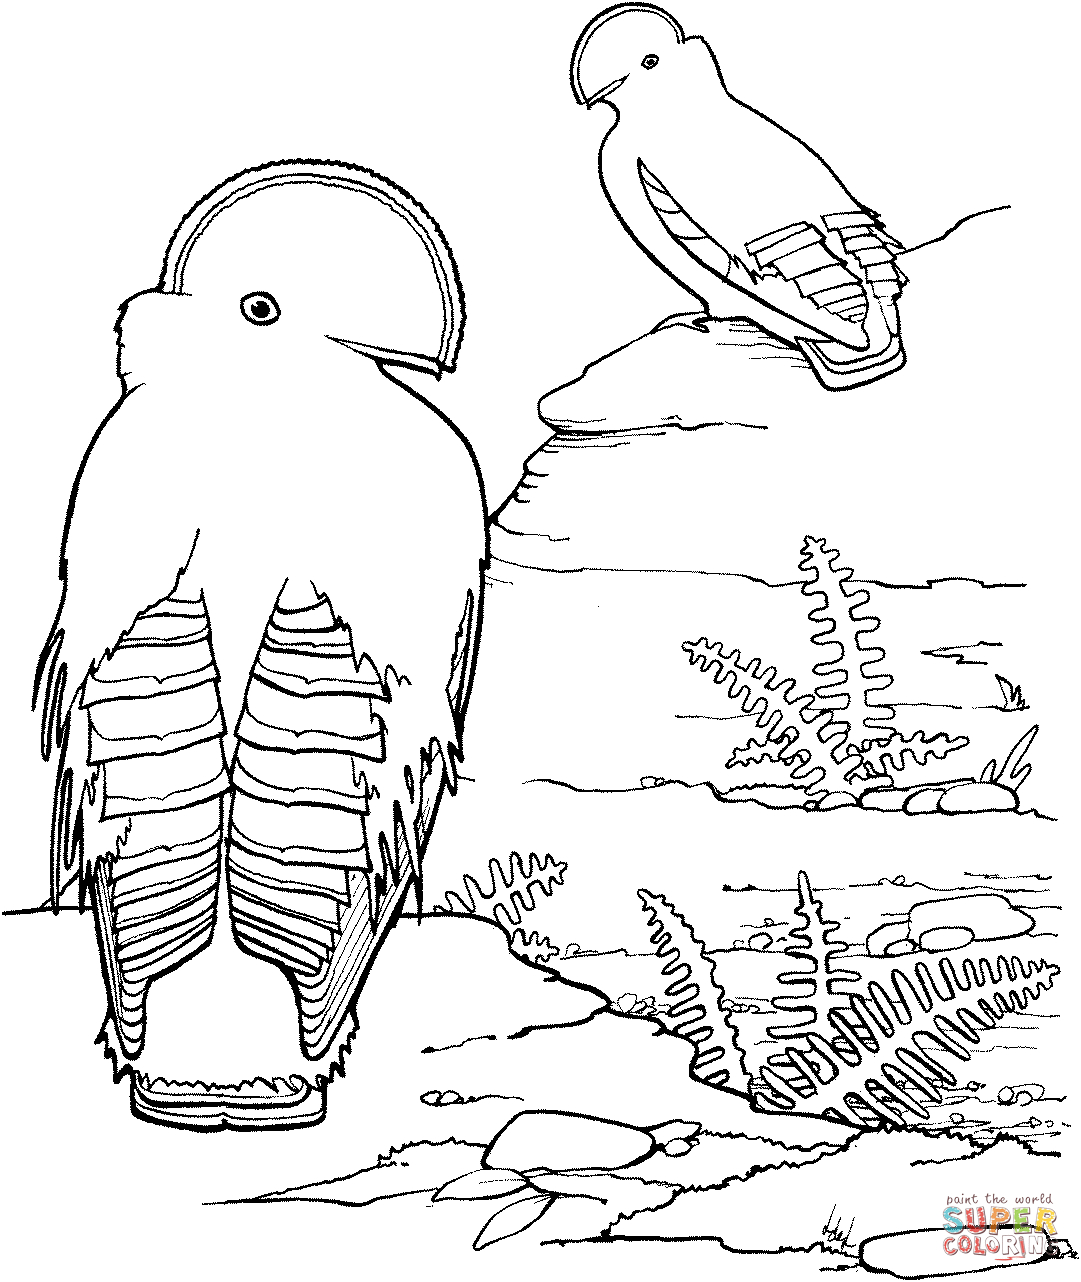 Rock Coloring Page Guianan Cock Of The Rock Coloring Page Free Printable Coloring Pages